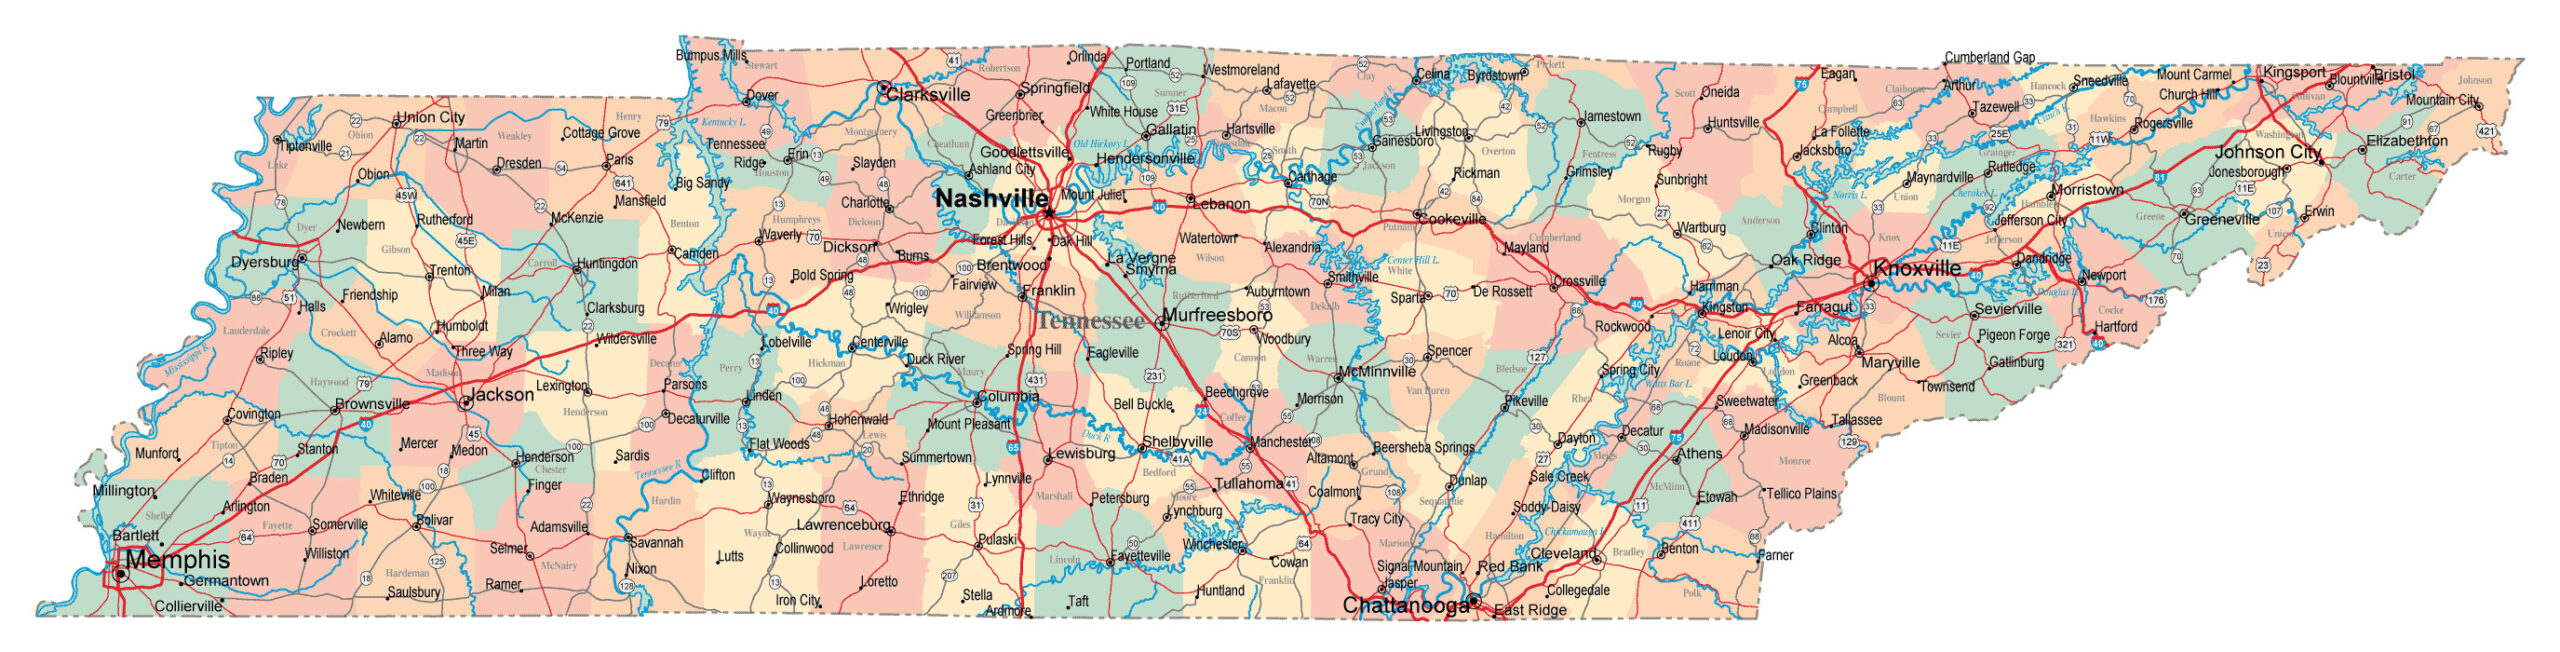 Large Administrative Map Of Tennessee State With Roads Highways And 